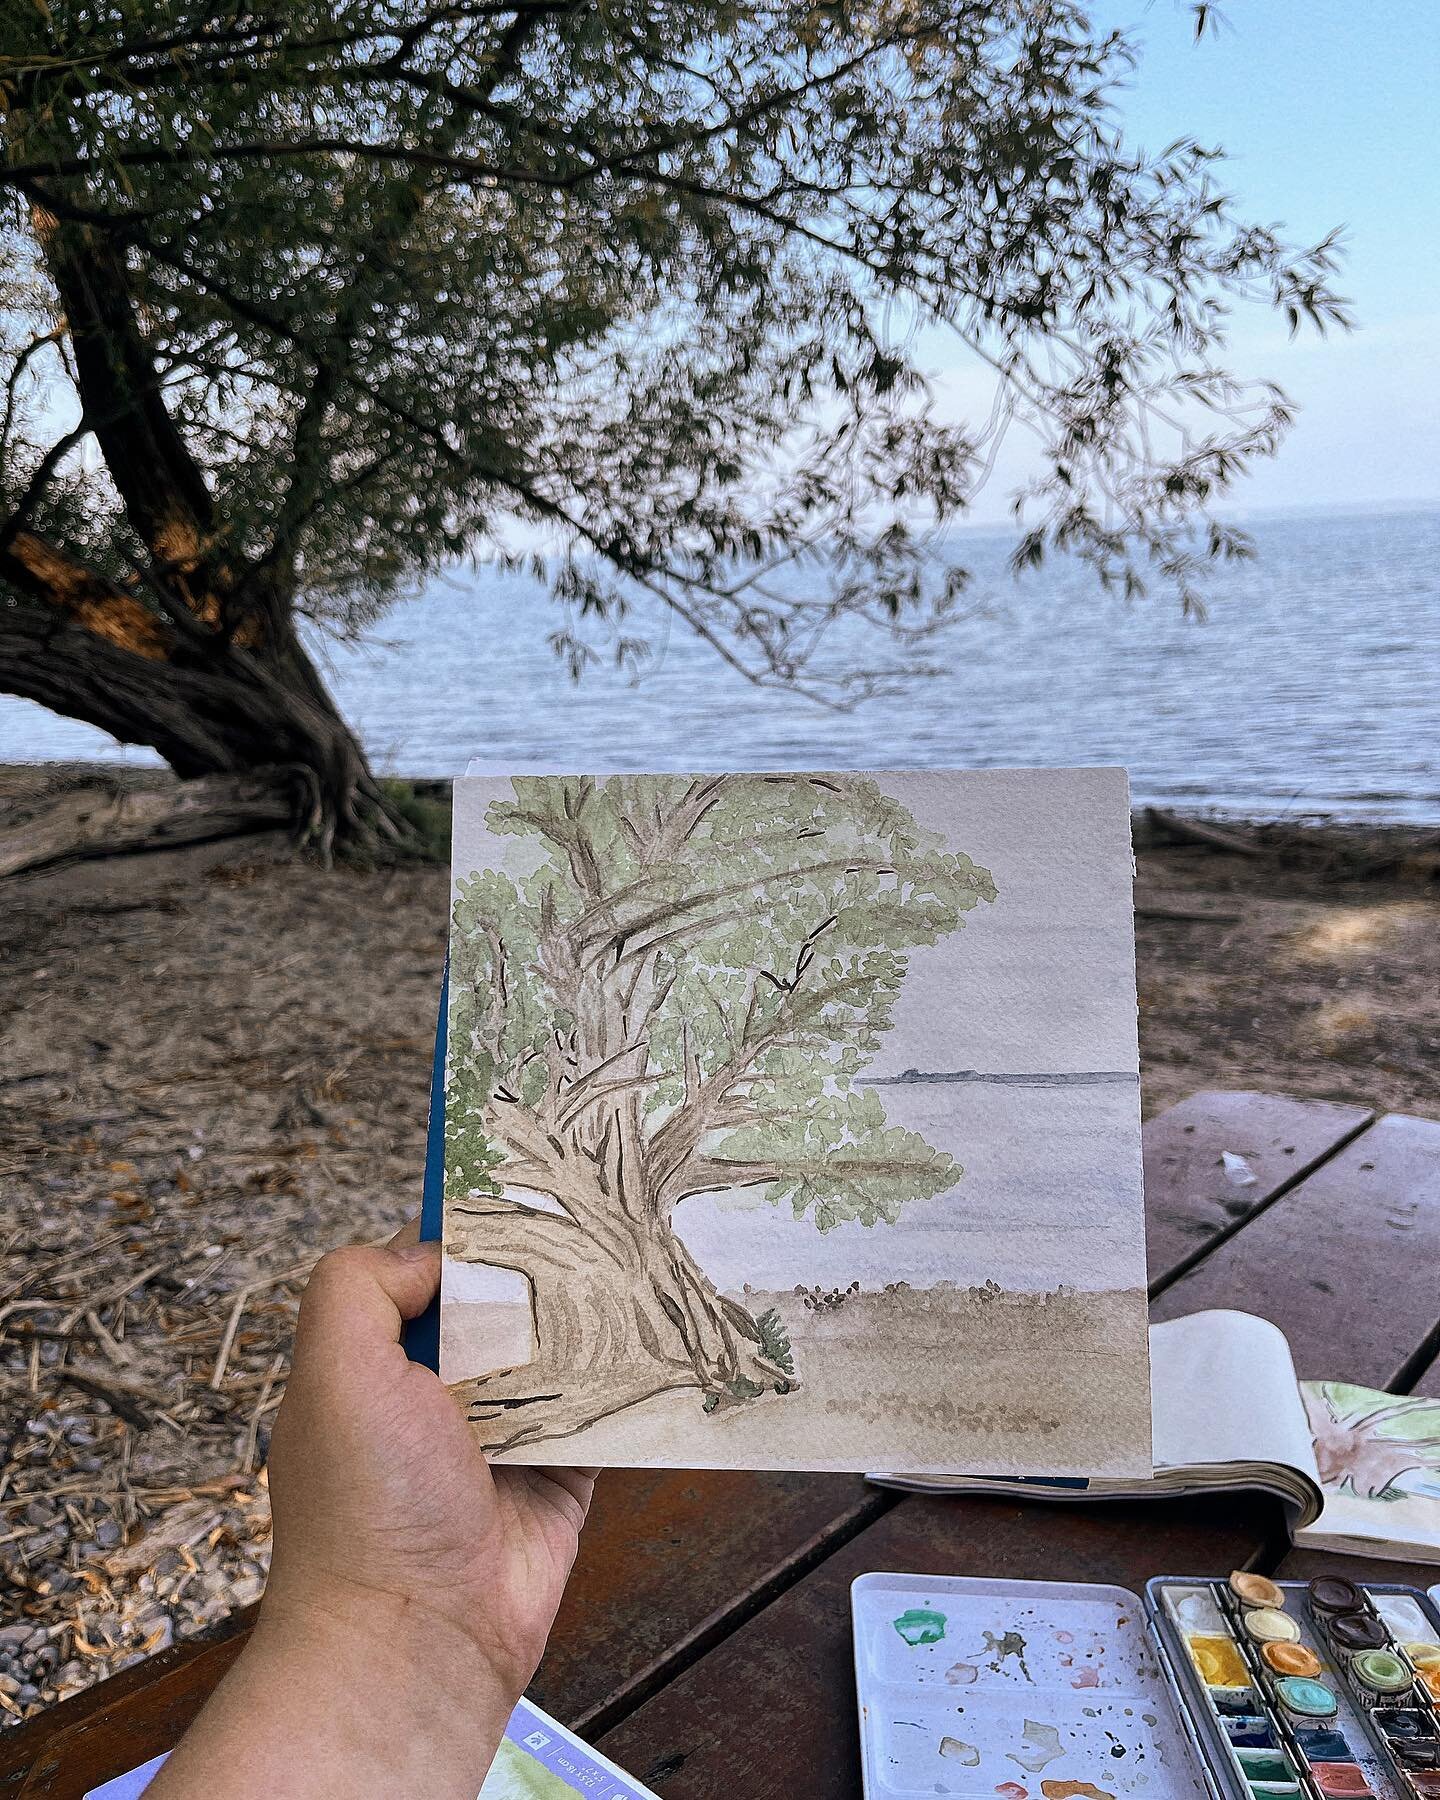 Tree on a beach in watercolour.
.
.
I find trees to be challenging to draw generally, but I like the colours of this one.
.
.
.
#watercolourart #naturelovers #watercolorpainting